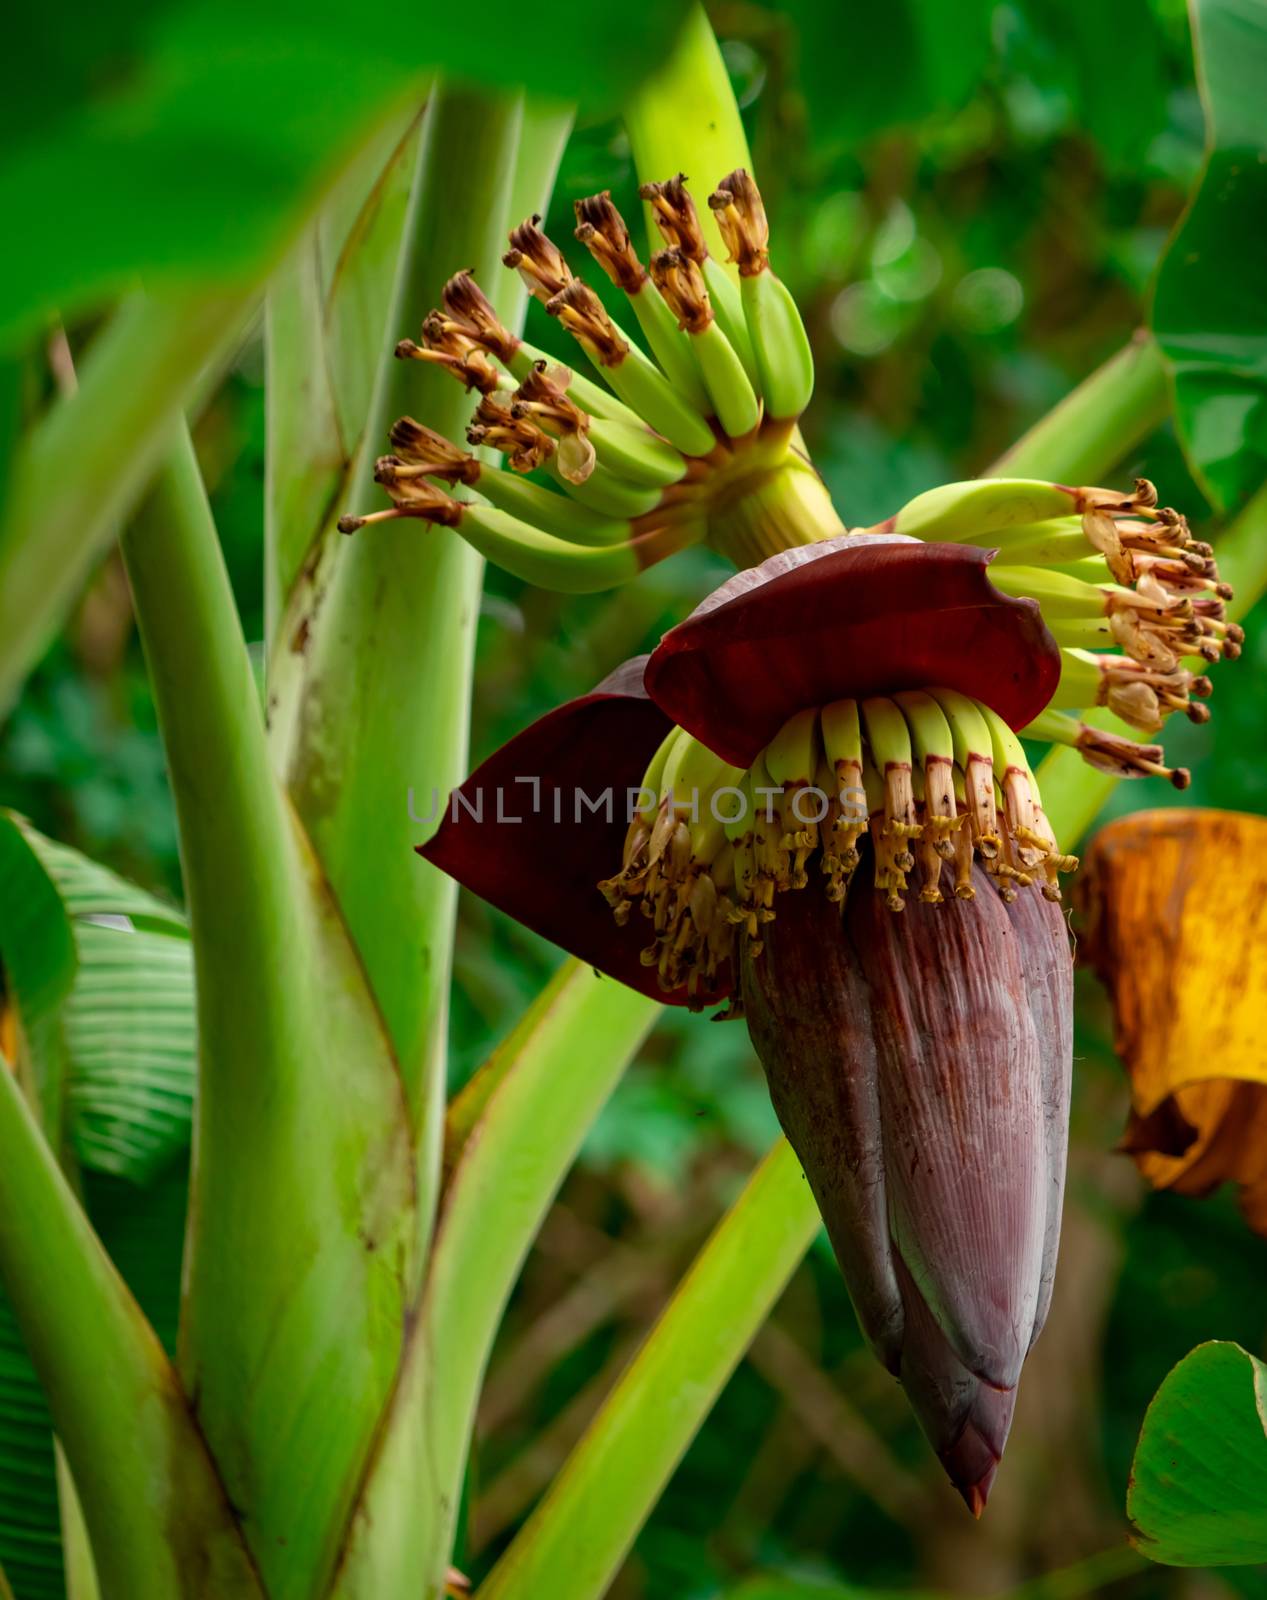 Banana tree and green leaves with banana blossom. Banana heart is raw material for make vegan fish and meat. Vegan food star. Meat free alternatives food. Plant-based meals. Purple skinned flower.